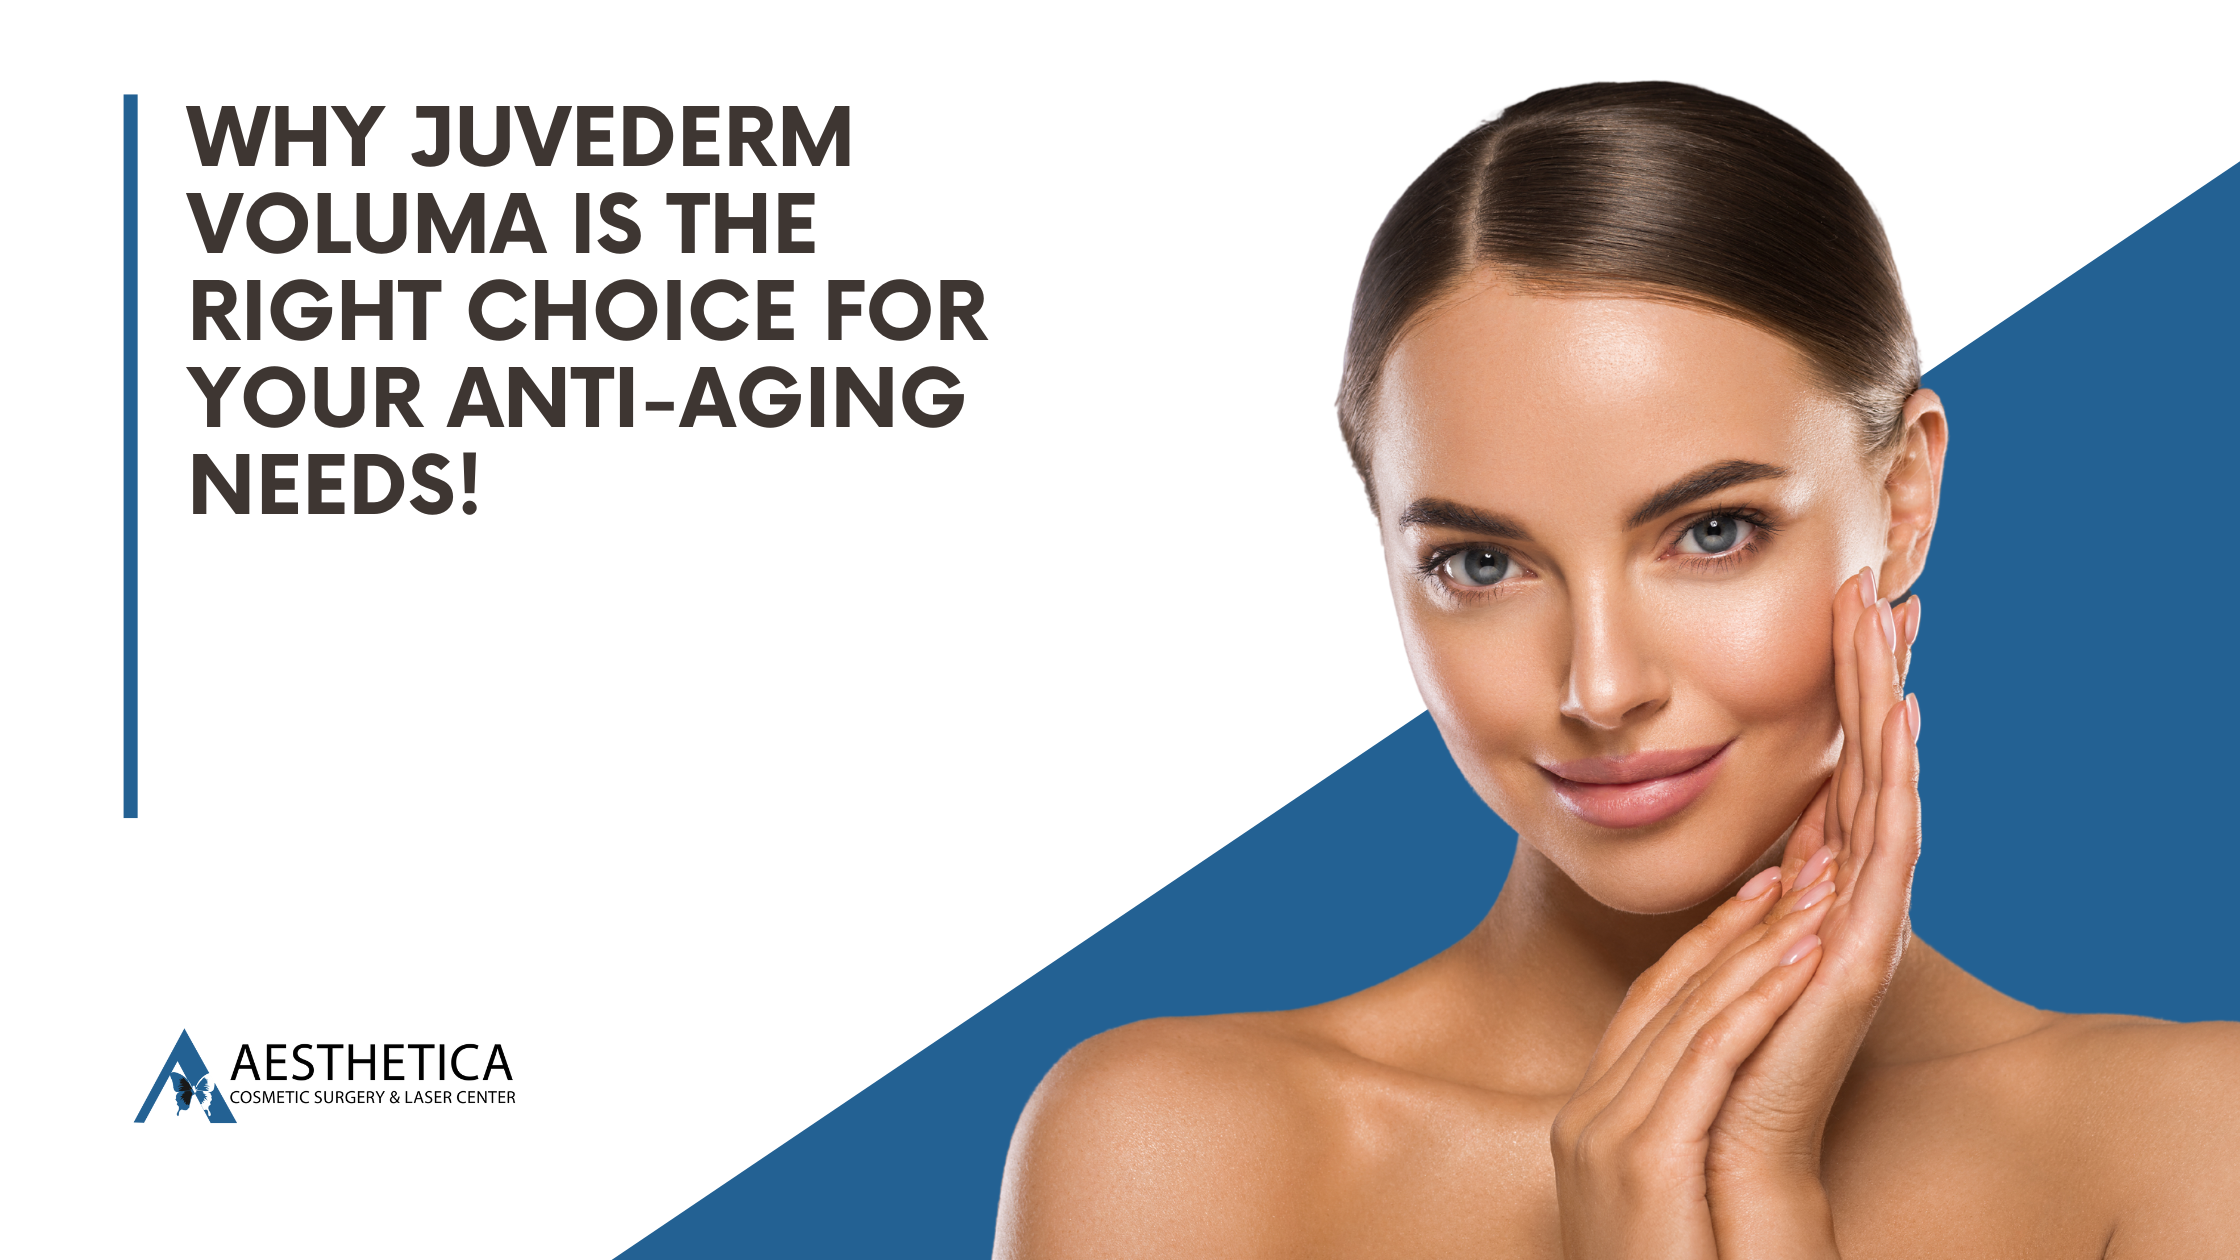 Why Juvederm Voluma Is the Right Choice for Your Anti-Aging Needs!